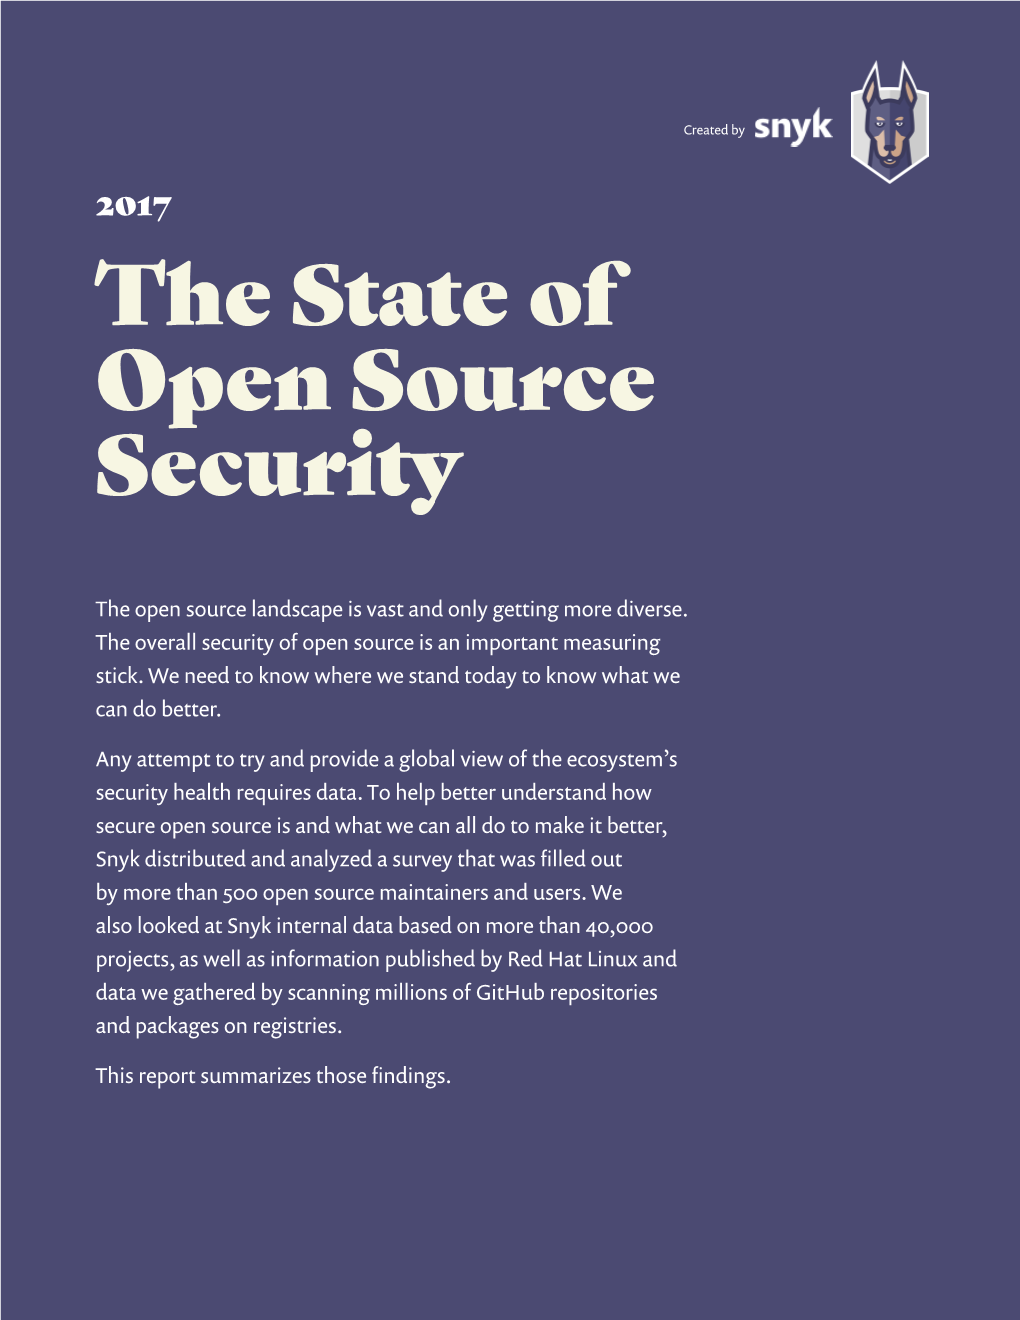 The State of Open Source Security